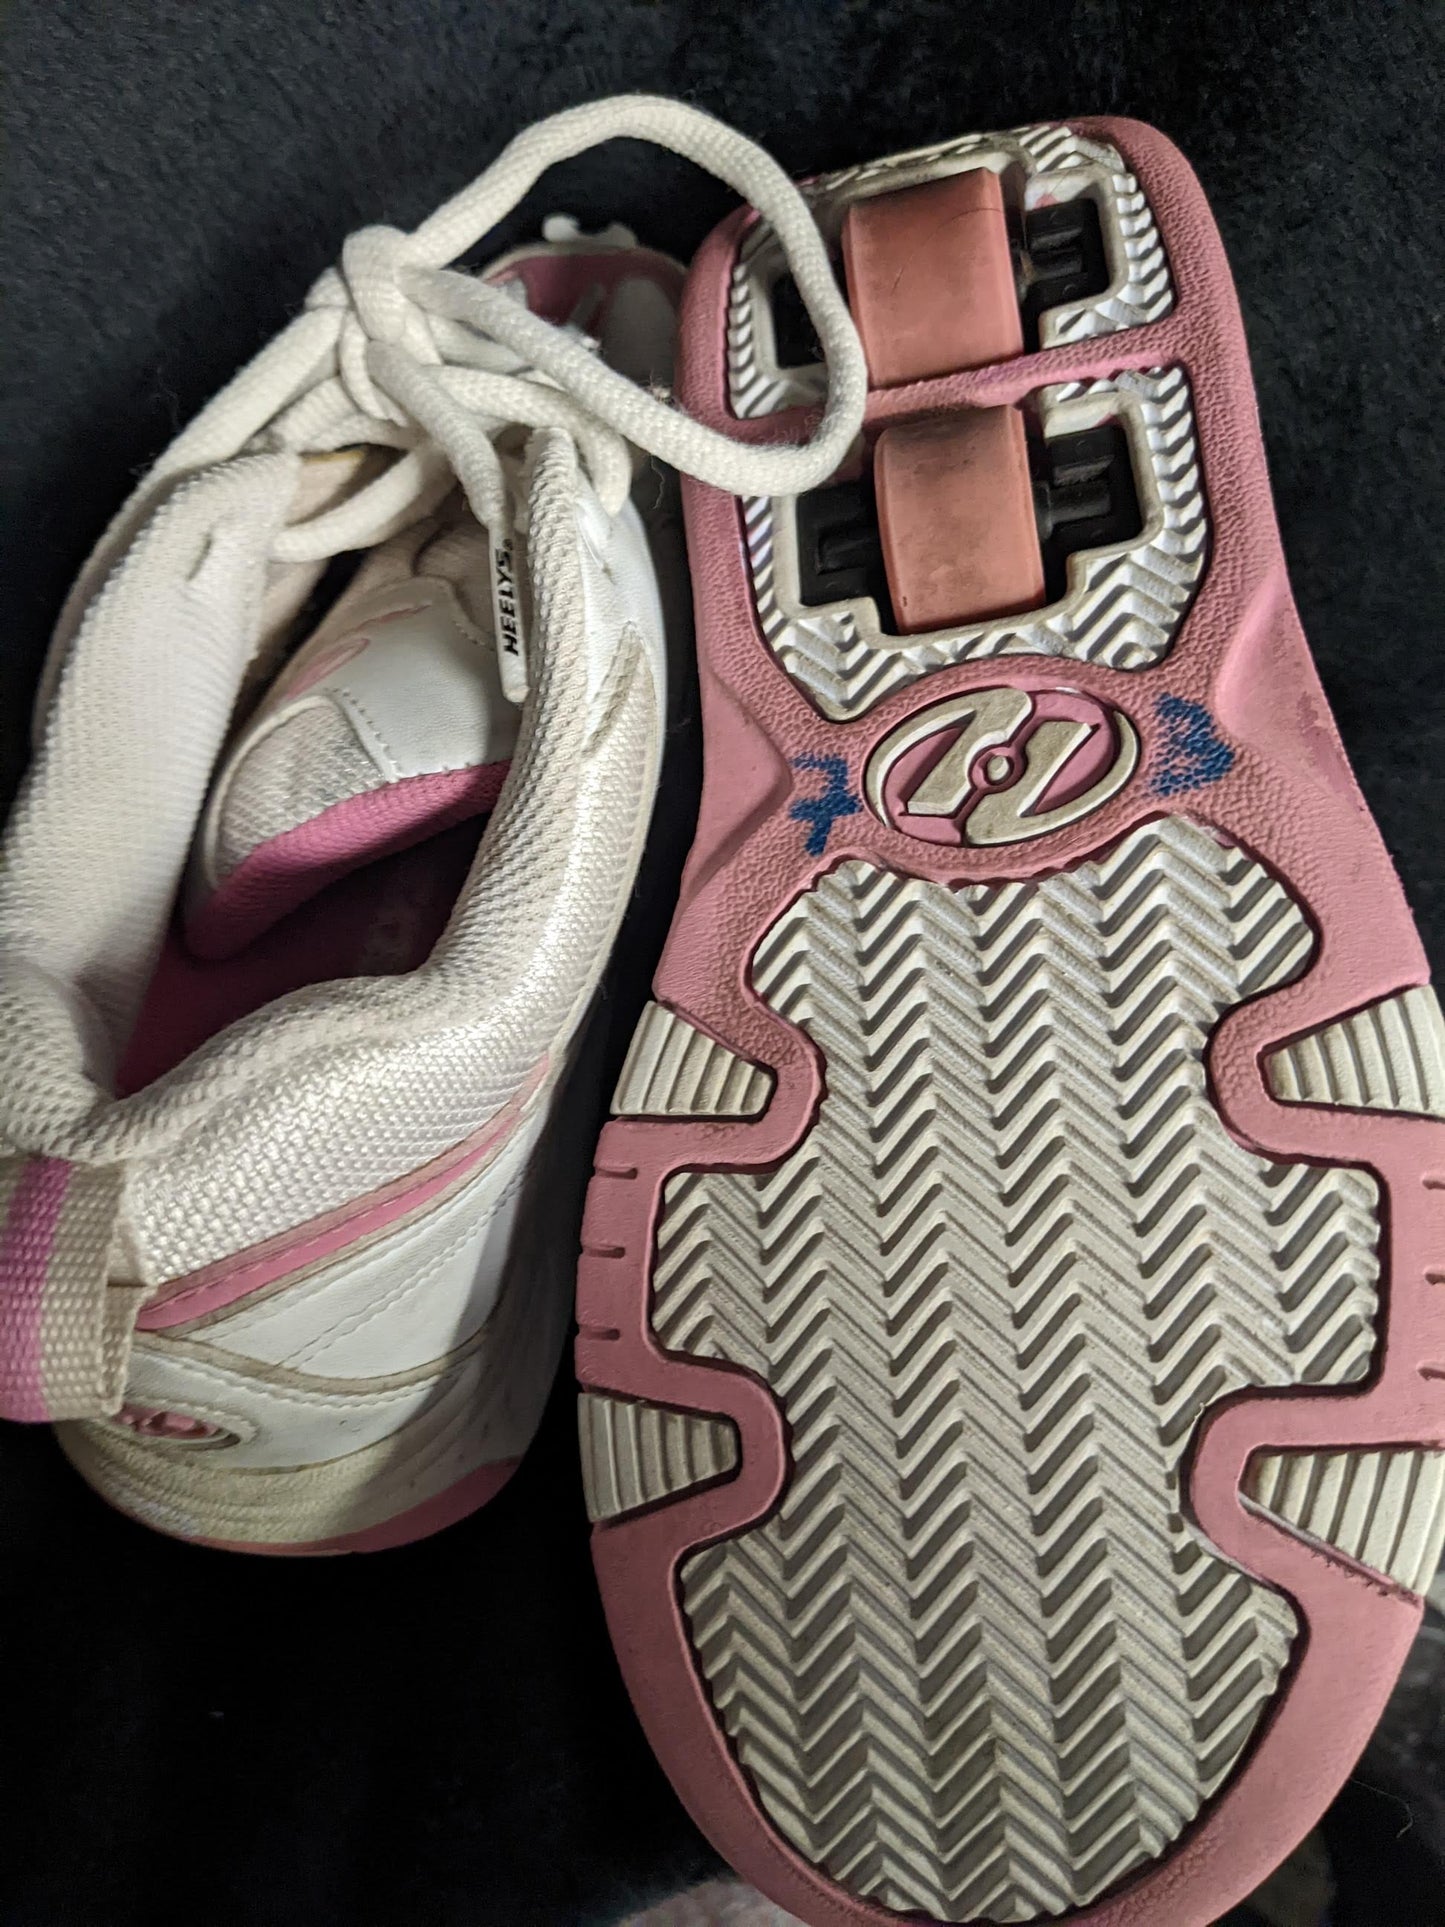 Heely's Roller Shoes Size 5 Color Pink Condition Used